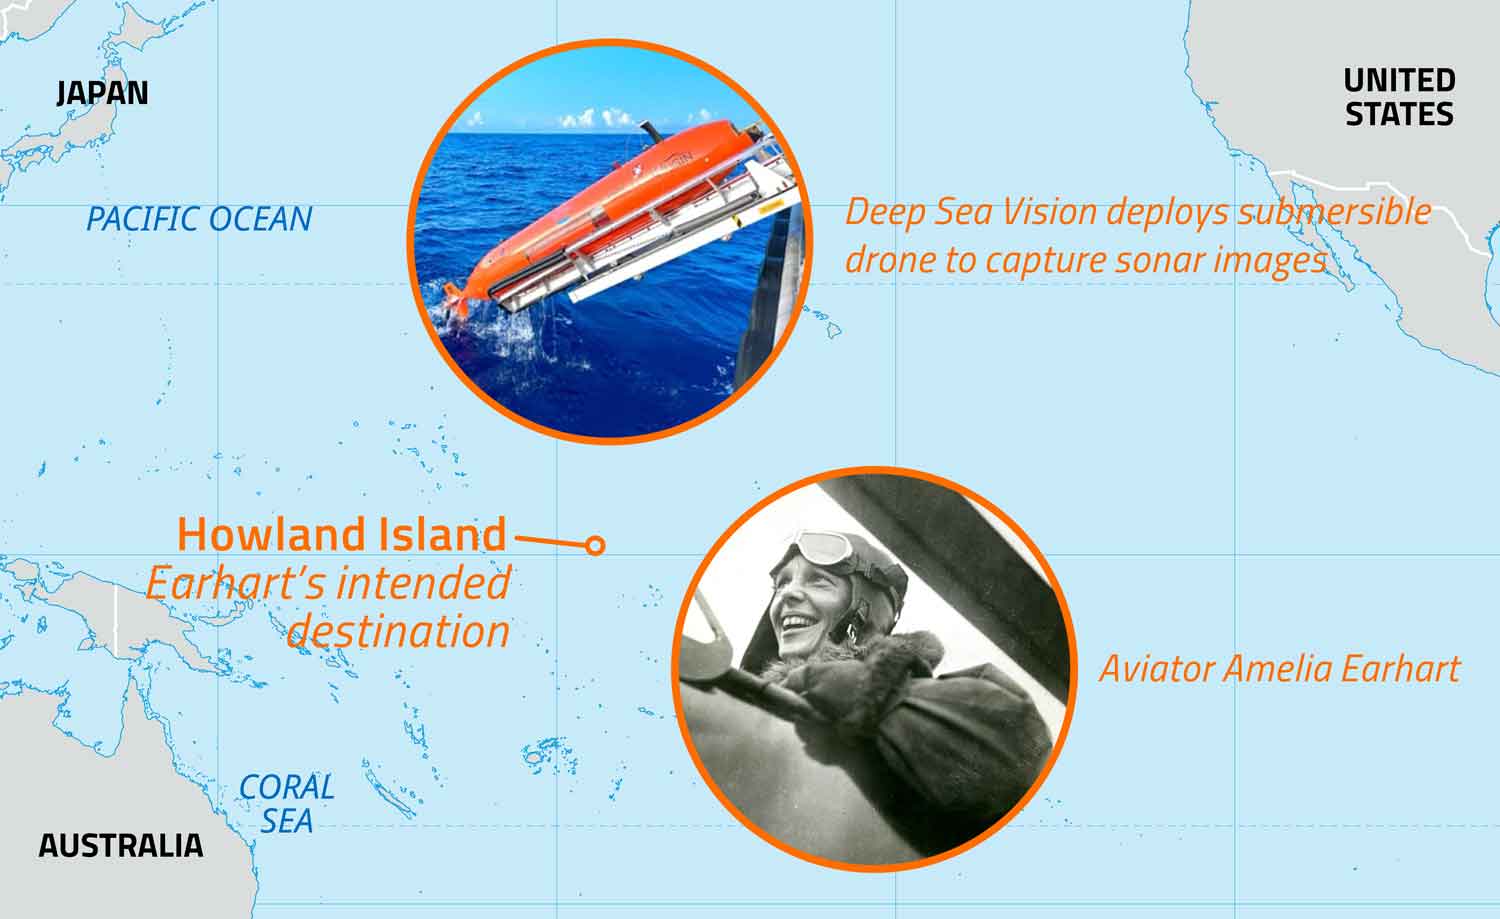 A map showing the location of Howland Island along with photos of Earhart and the submersible operated by Deep Sea Vision.